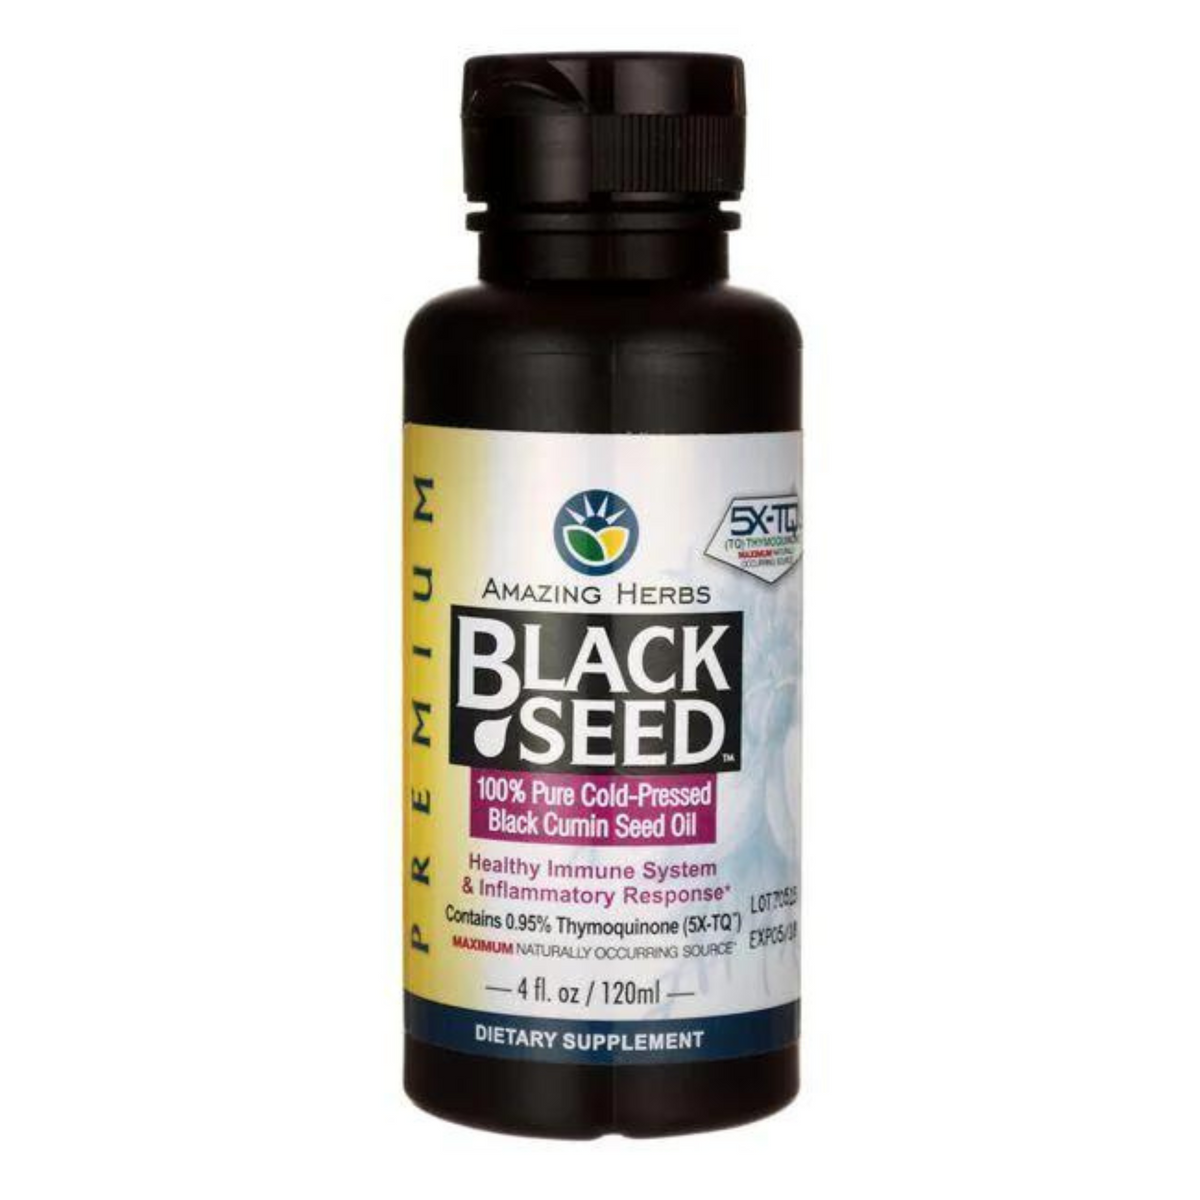 Primary image of Cold-Pressed Black Seed Oil